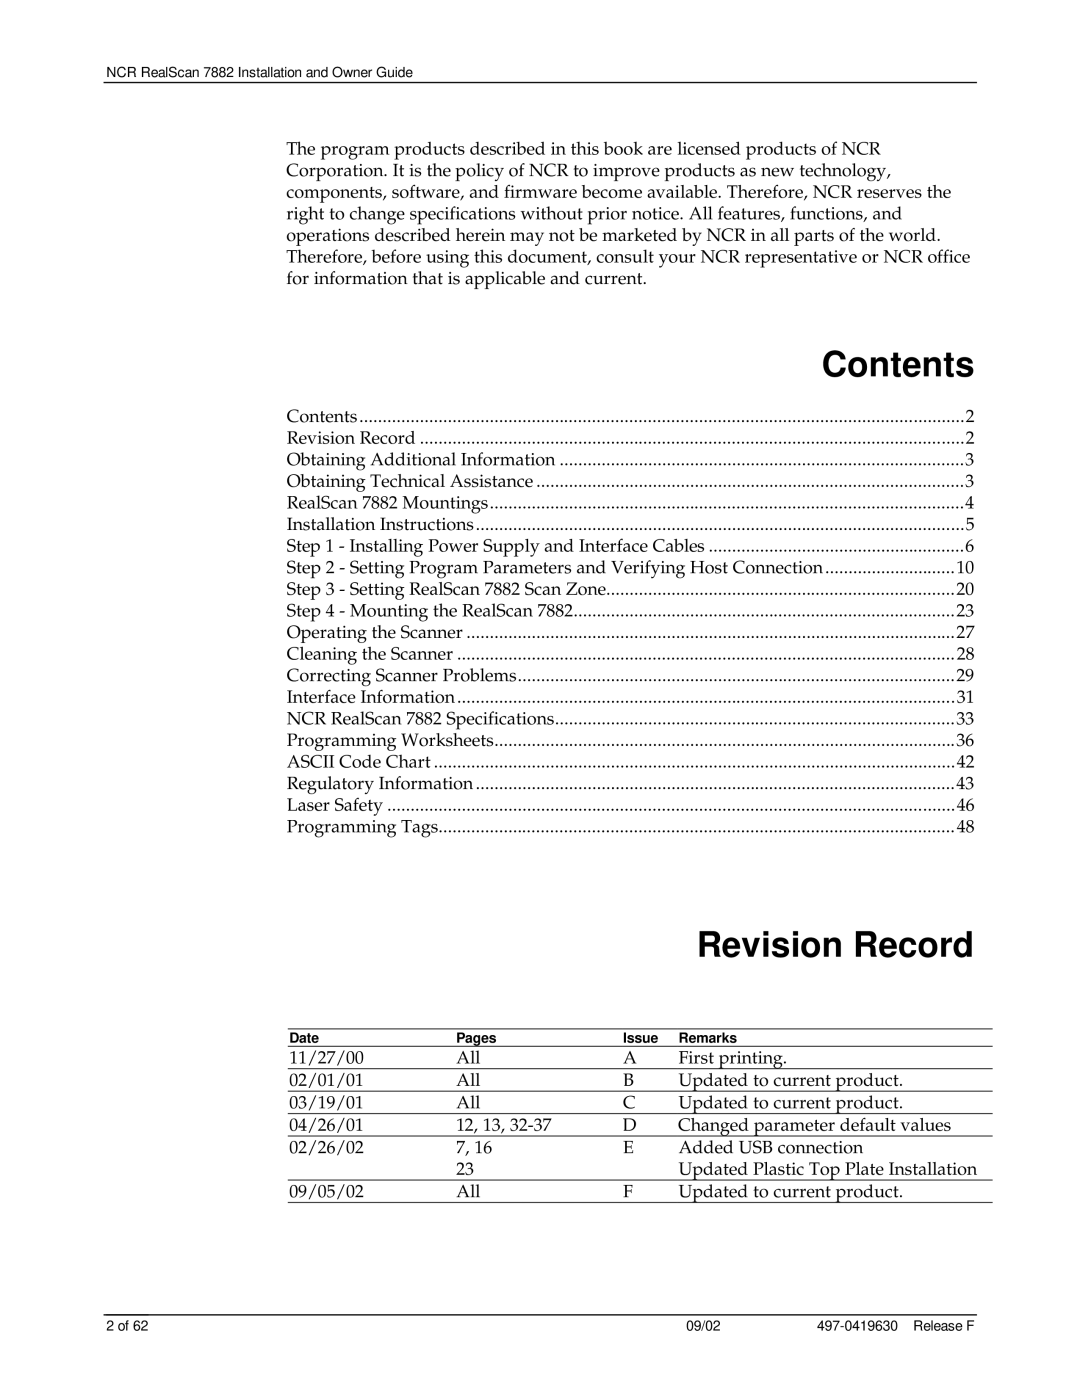 NCR 7882 manual Revision Record, Contents 